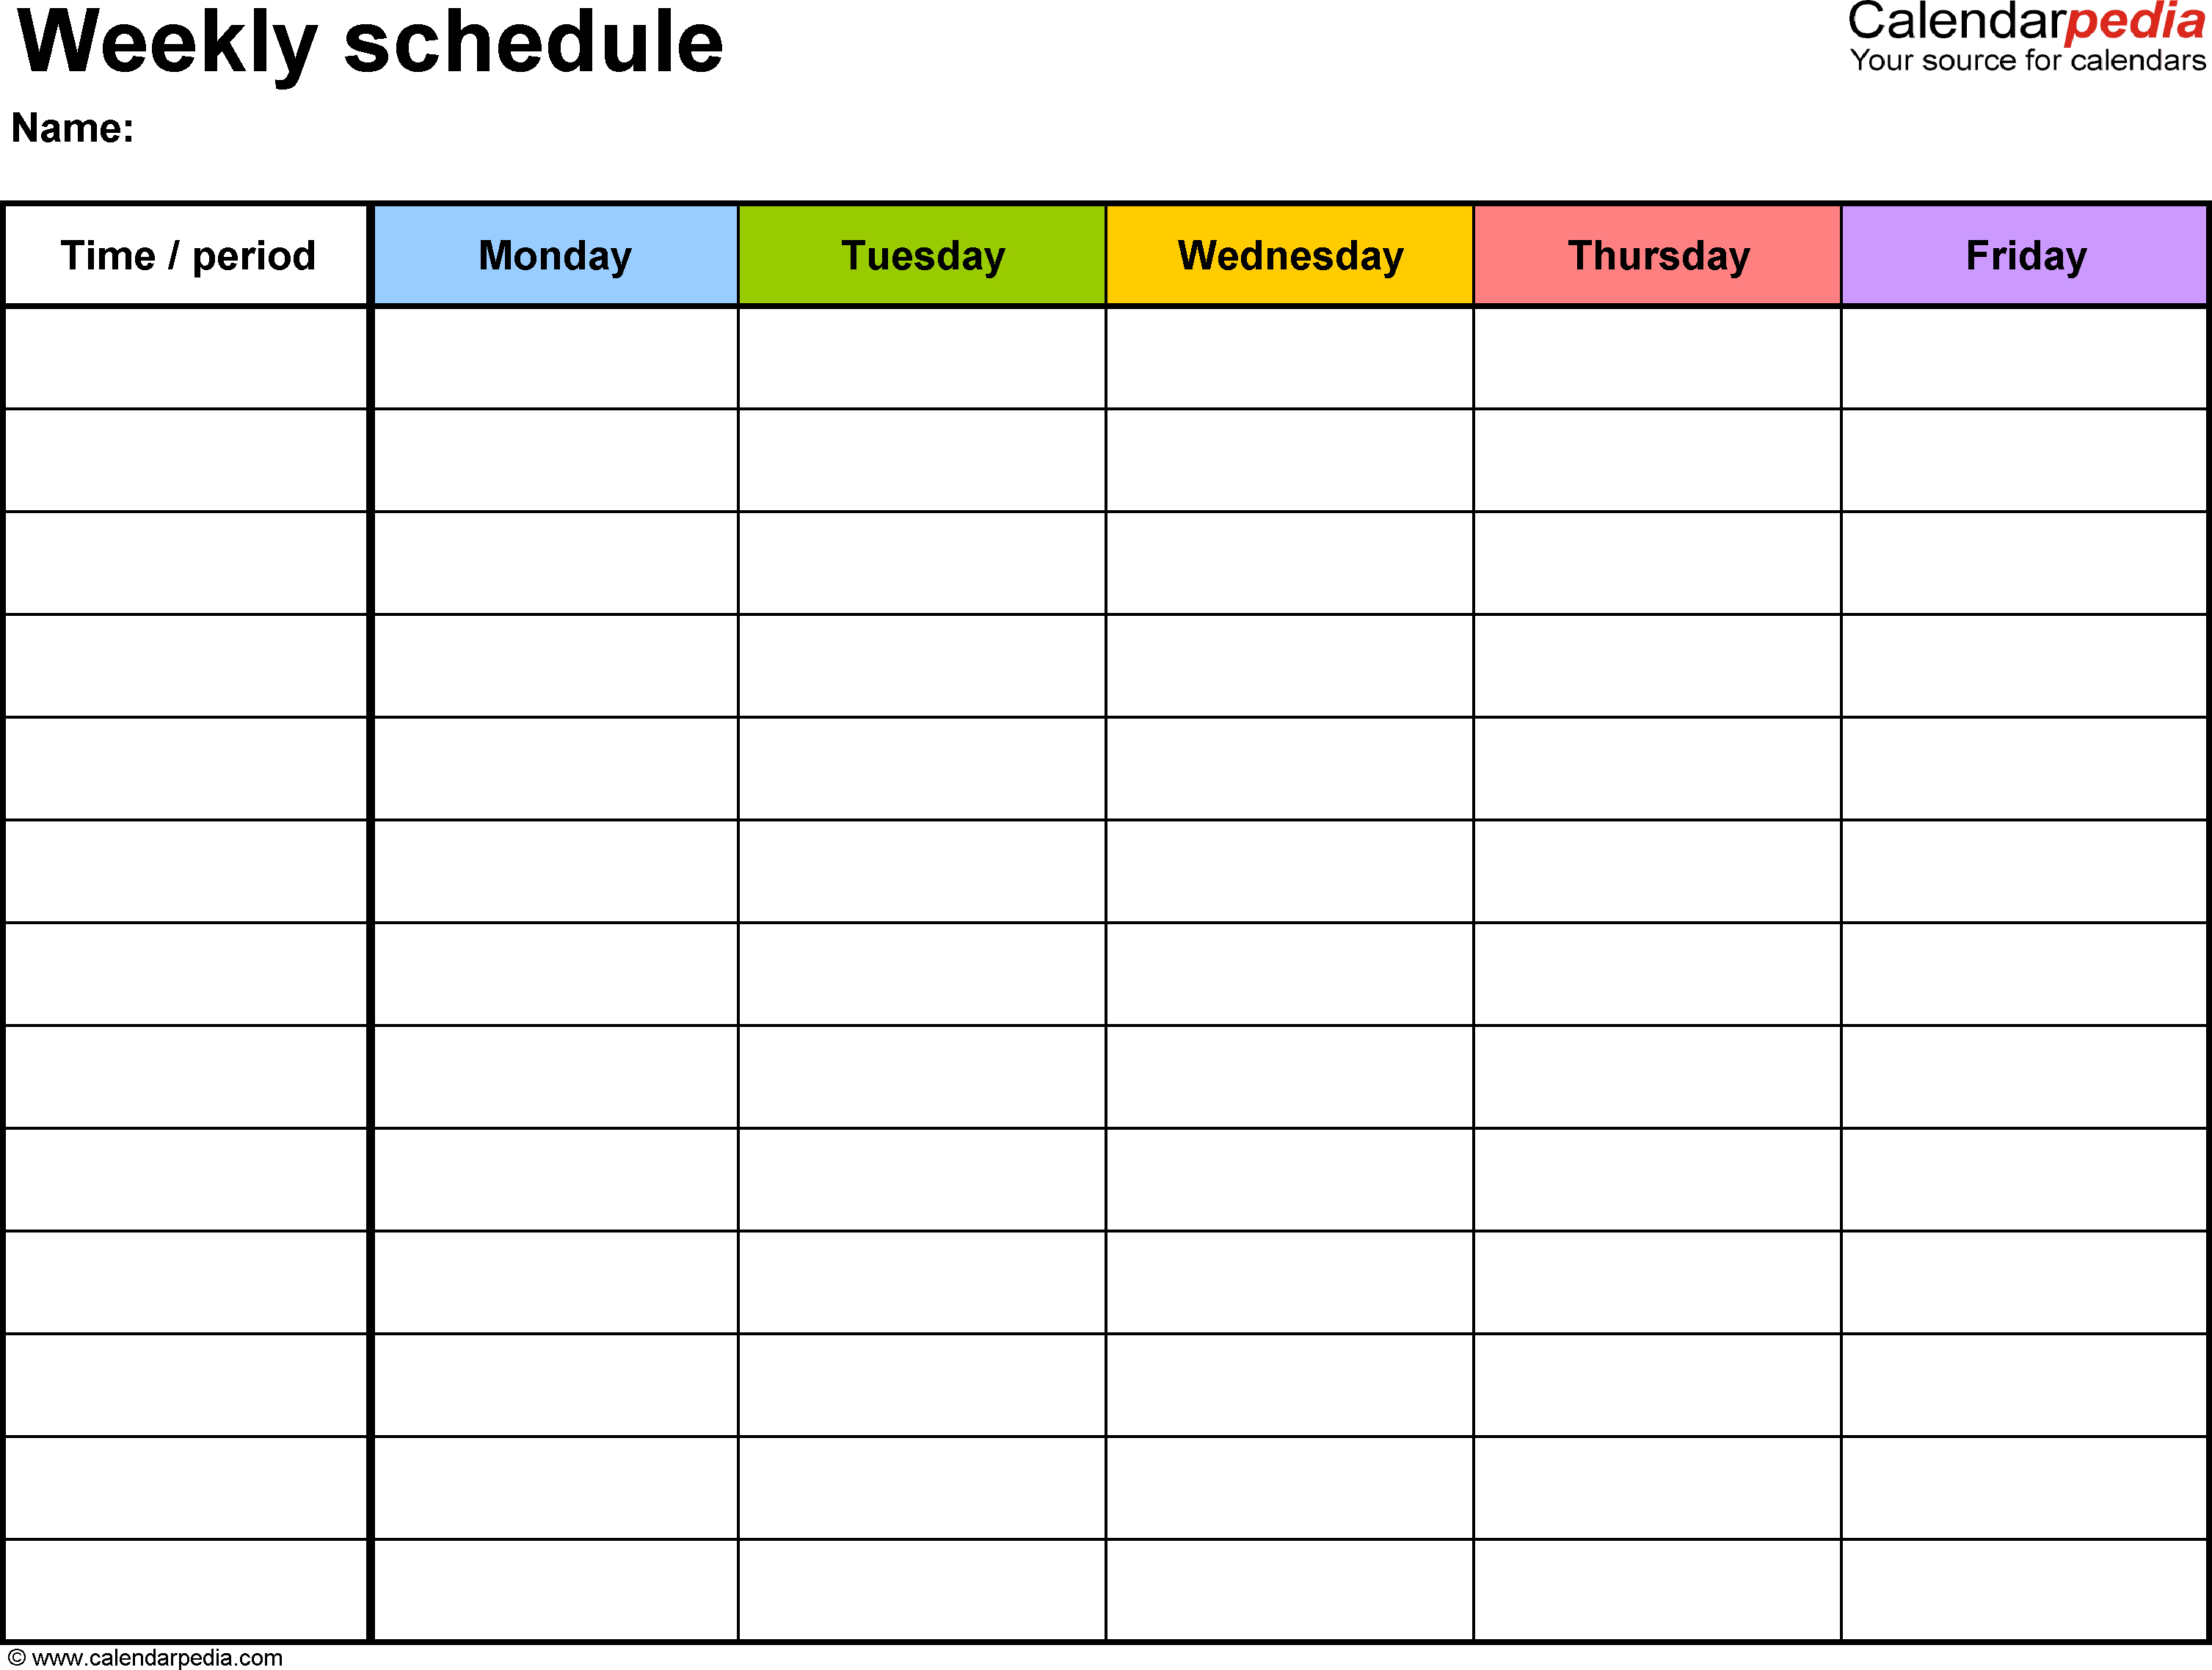 Free Weekly Schedule Templates For Pdf - 18 Templates - Free Printable Schedule